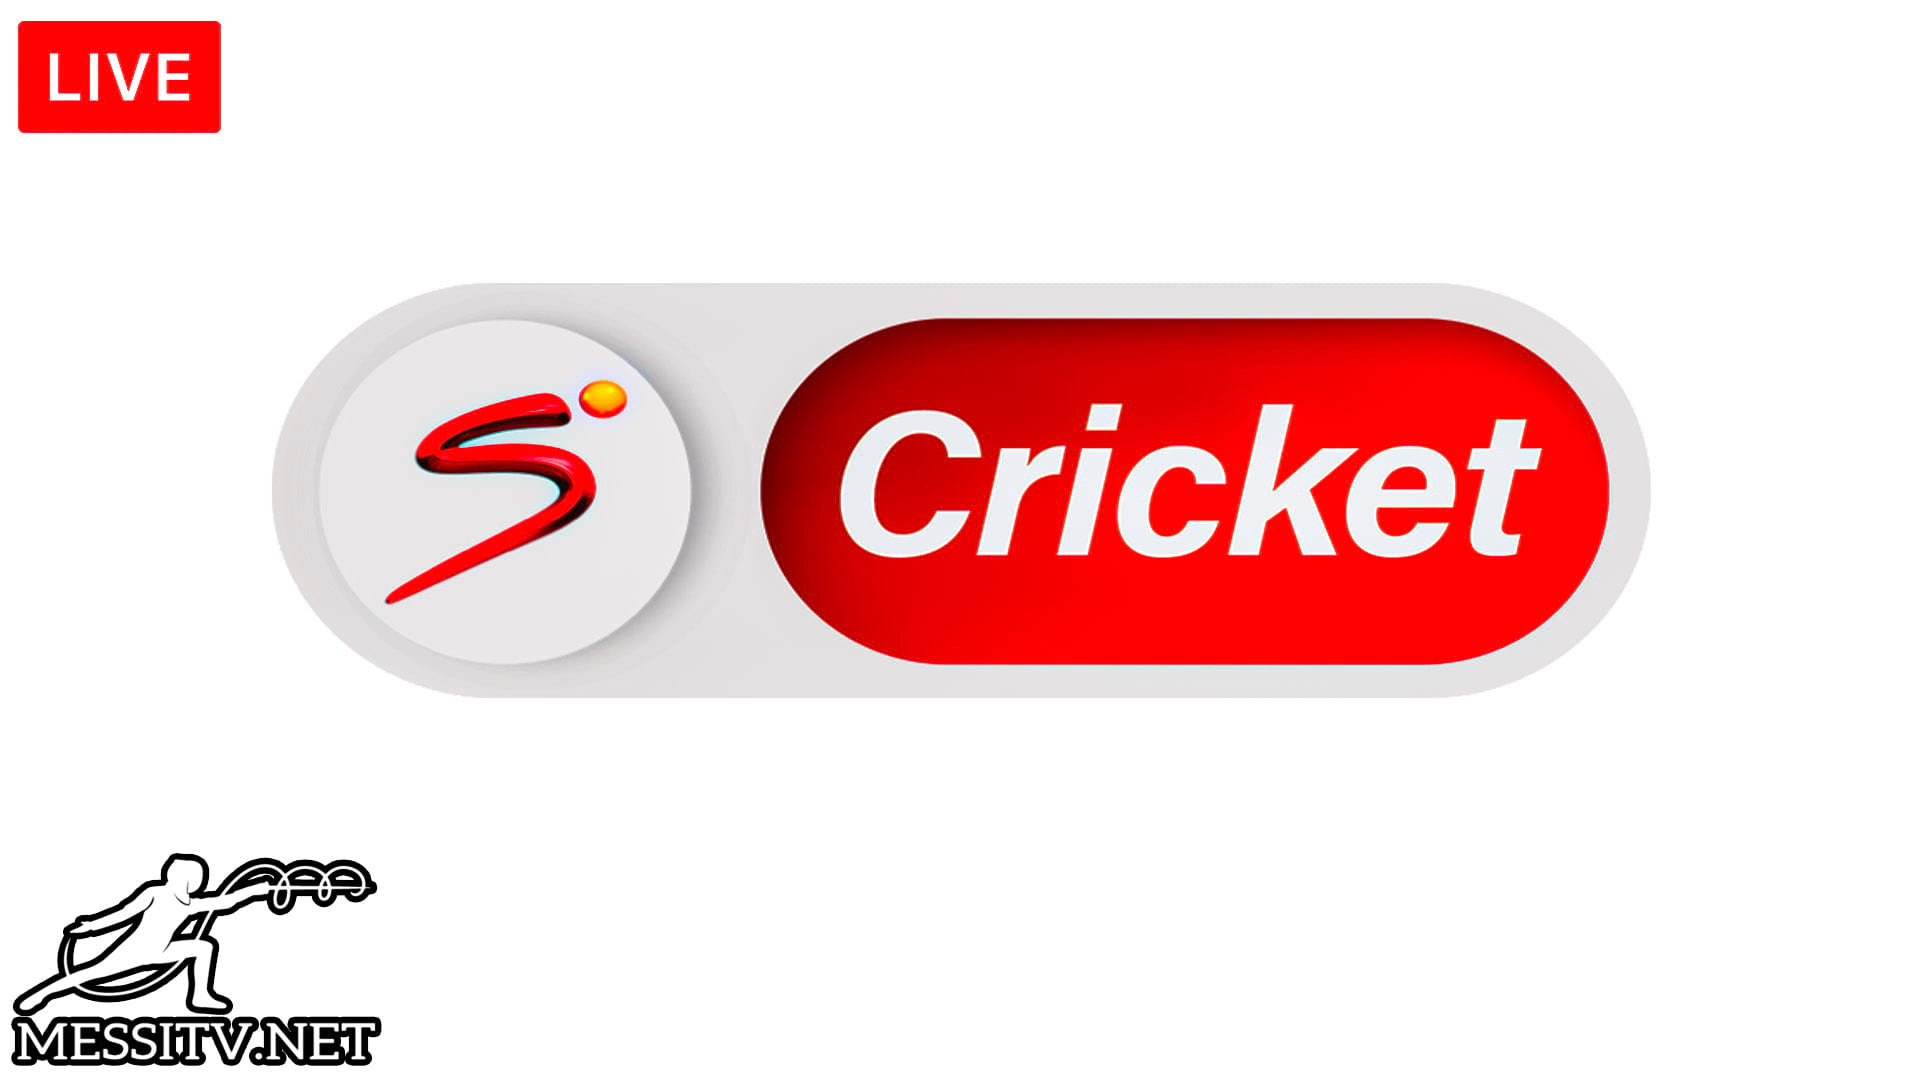 Willow Cricket, fox Cricket, Sky Sport Cricket, Supersport Cricket, Watch All Cricket Matches and Events Live Online [Full HD + 4K + Support Mobile], Watch ICC T20 World Cup Live Online, Watch MEN'S T20WC Live Stream Online, Watch ICC Cricket Live Stream Online, Cricket Highlights & FULL Game Replay, Watch UK TV, USA TV, England TV, australia TV live stream online